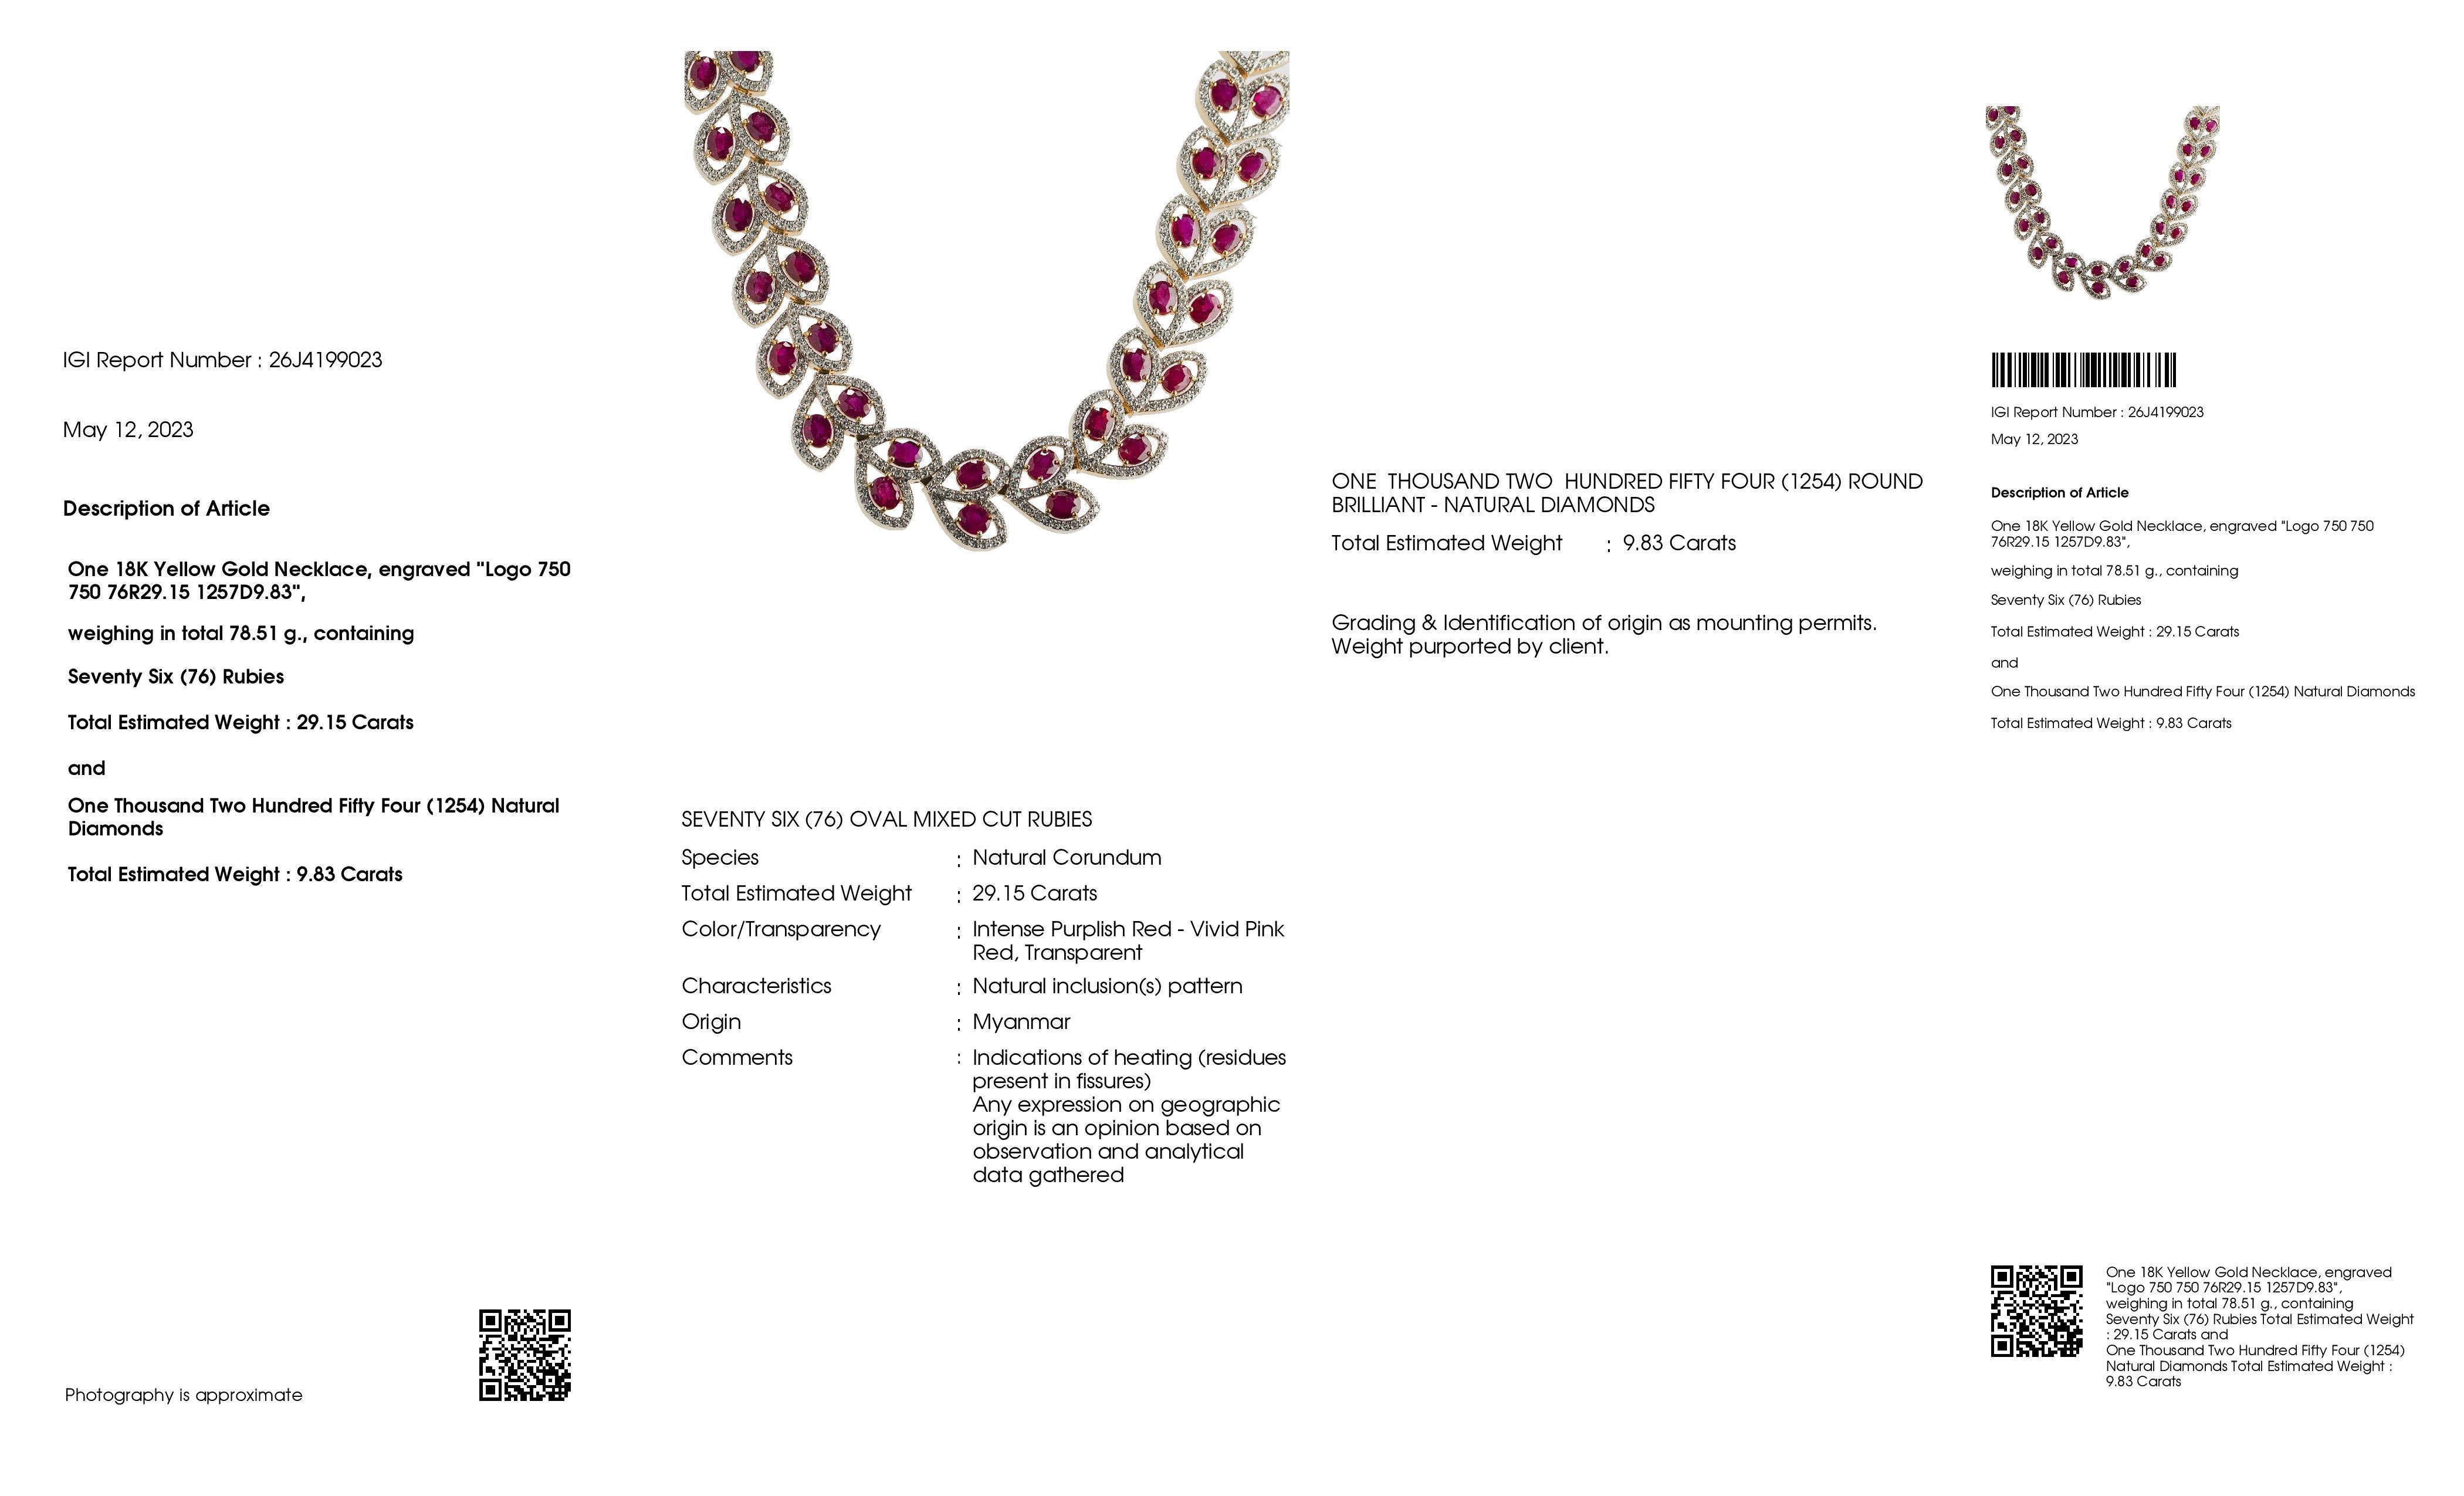 IGI Certified 29.15ct Natural Burma Rubies 9.83ct Natural Diamonds Gold Necklace For Sale 1